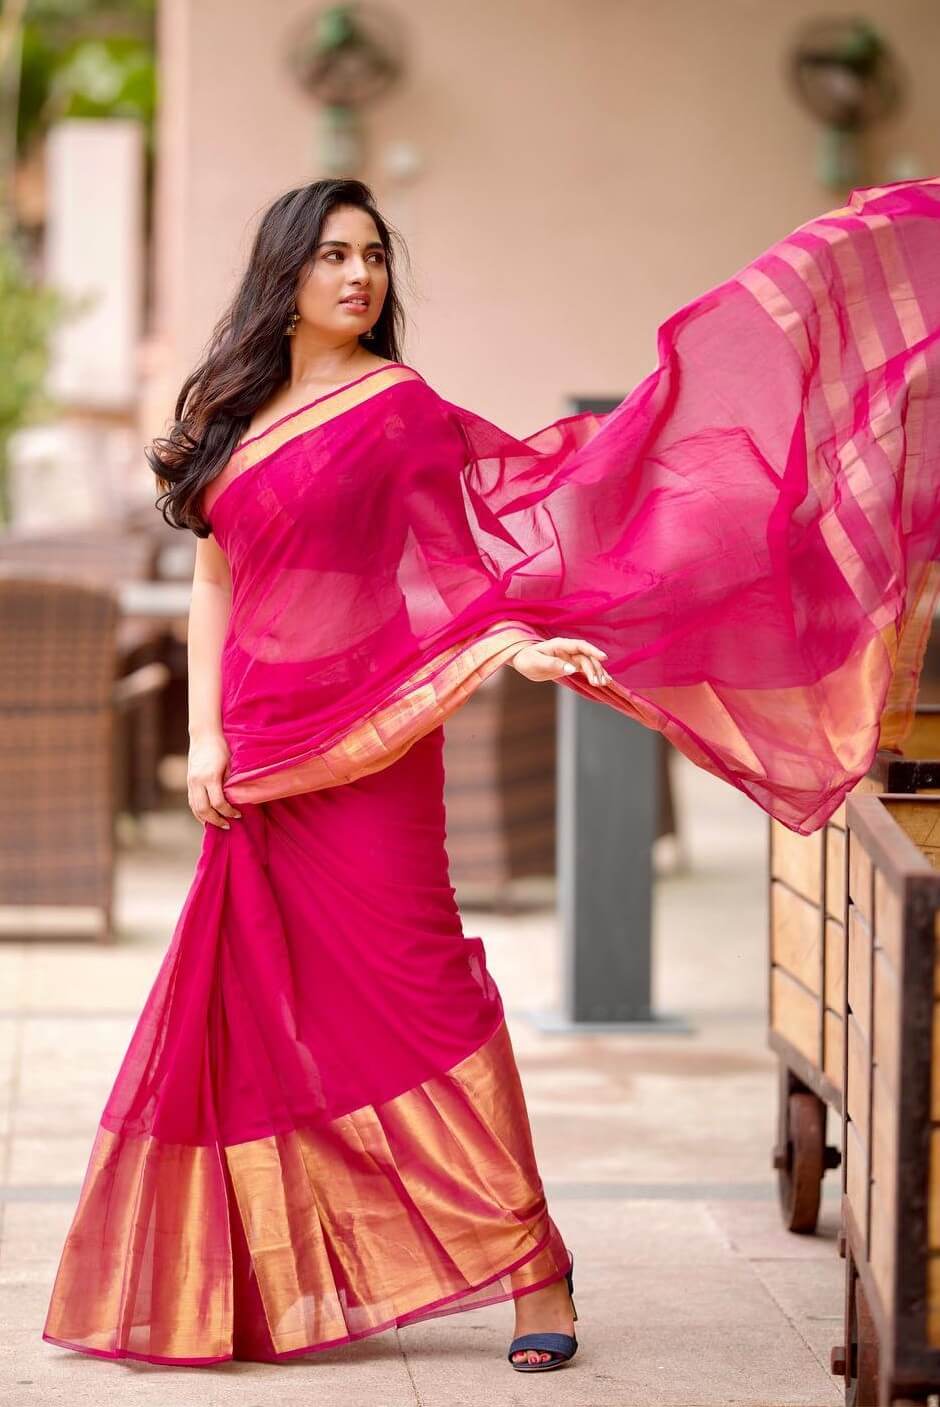 Srushti Dange Look Amazing In Hot Pink Sheer Golden Border Saree With Open Hairstyle Fabulous Outfits & Looks